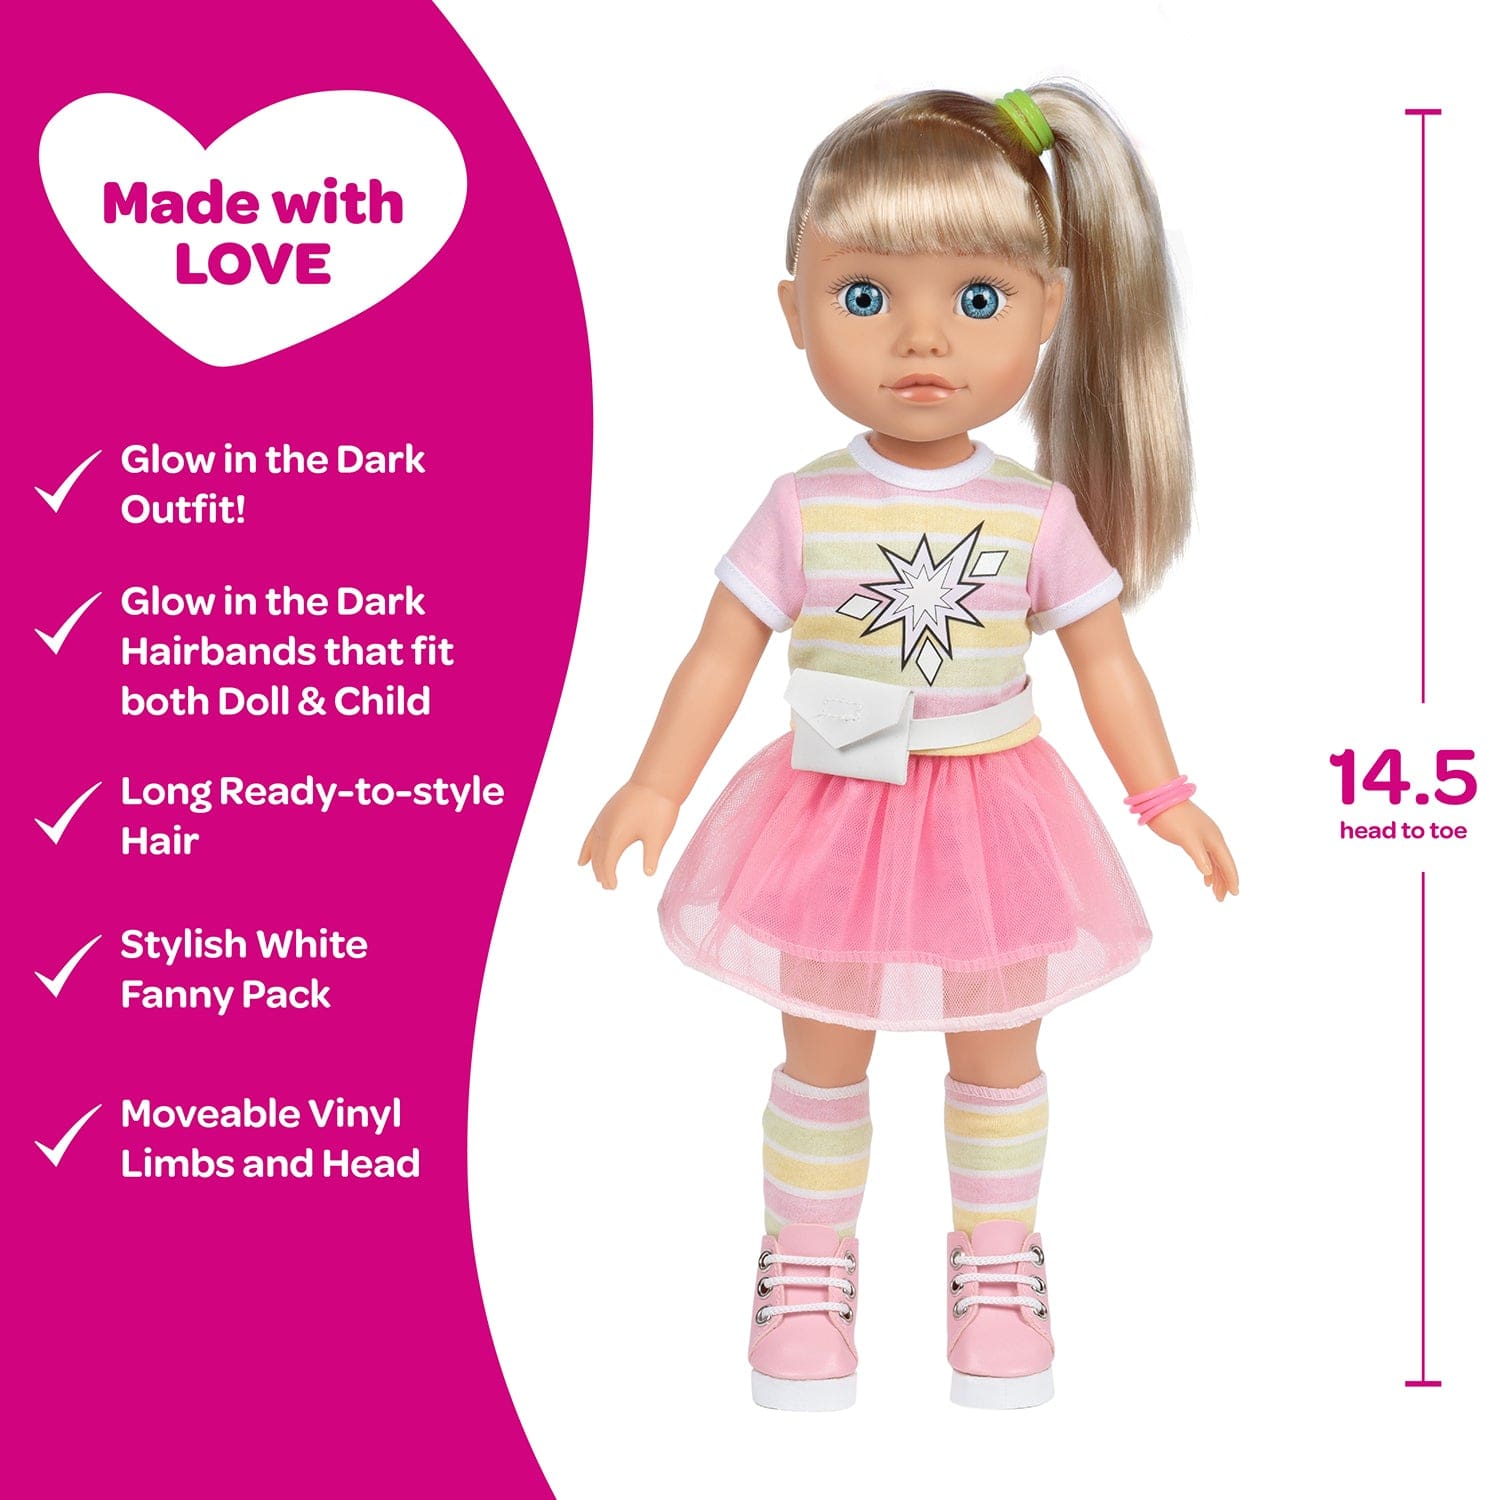 Riley from Adora's Glow Girl Collection! Feauring glow-in-the-dark fashion and accessories